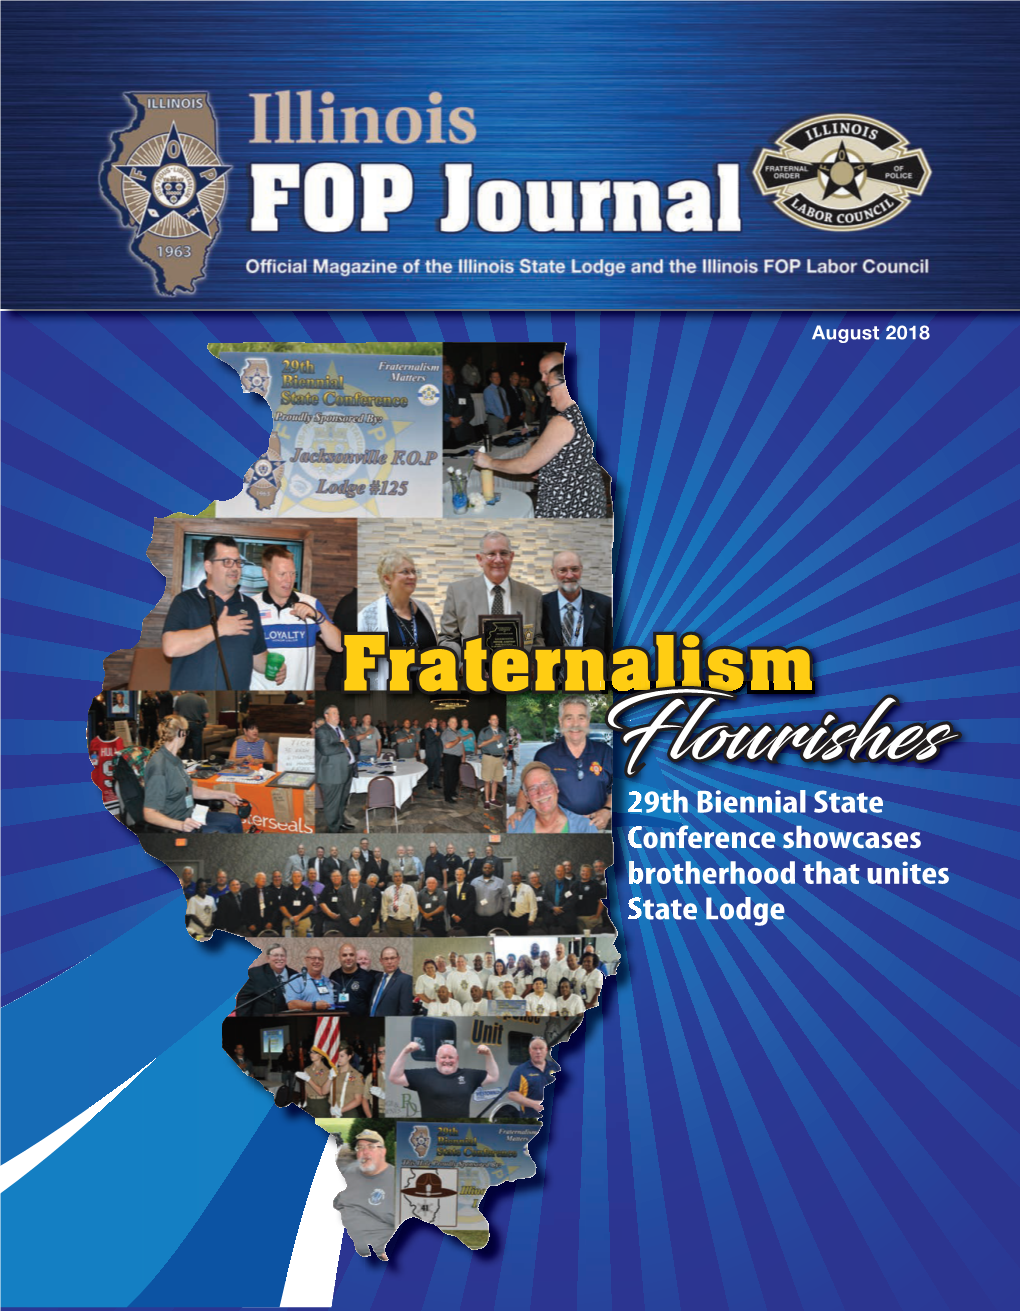 Fraternalism Flourishes 29Th Biennial State Conference Showcases Brotherhood That Unites State Lodge